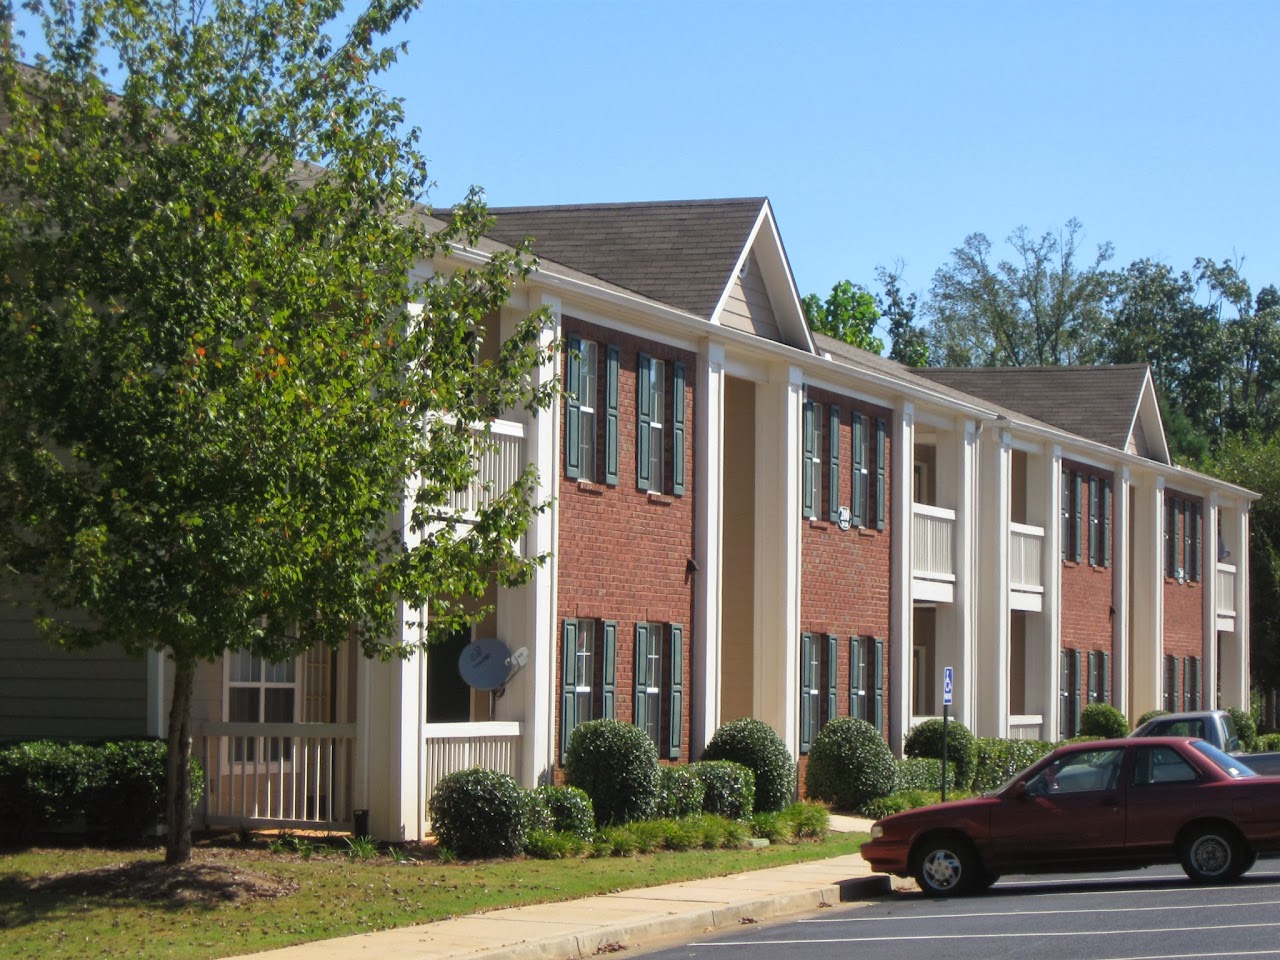 Photo of MAGNOLIA HEIGHTS APARTMENTS. Affordable housing located at 10156 MAGNOLIA HEIGHTS CIR COVINGTON, GA 30014